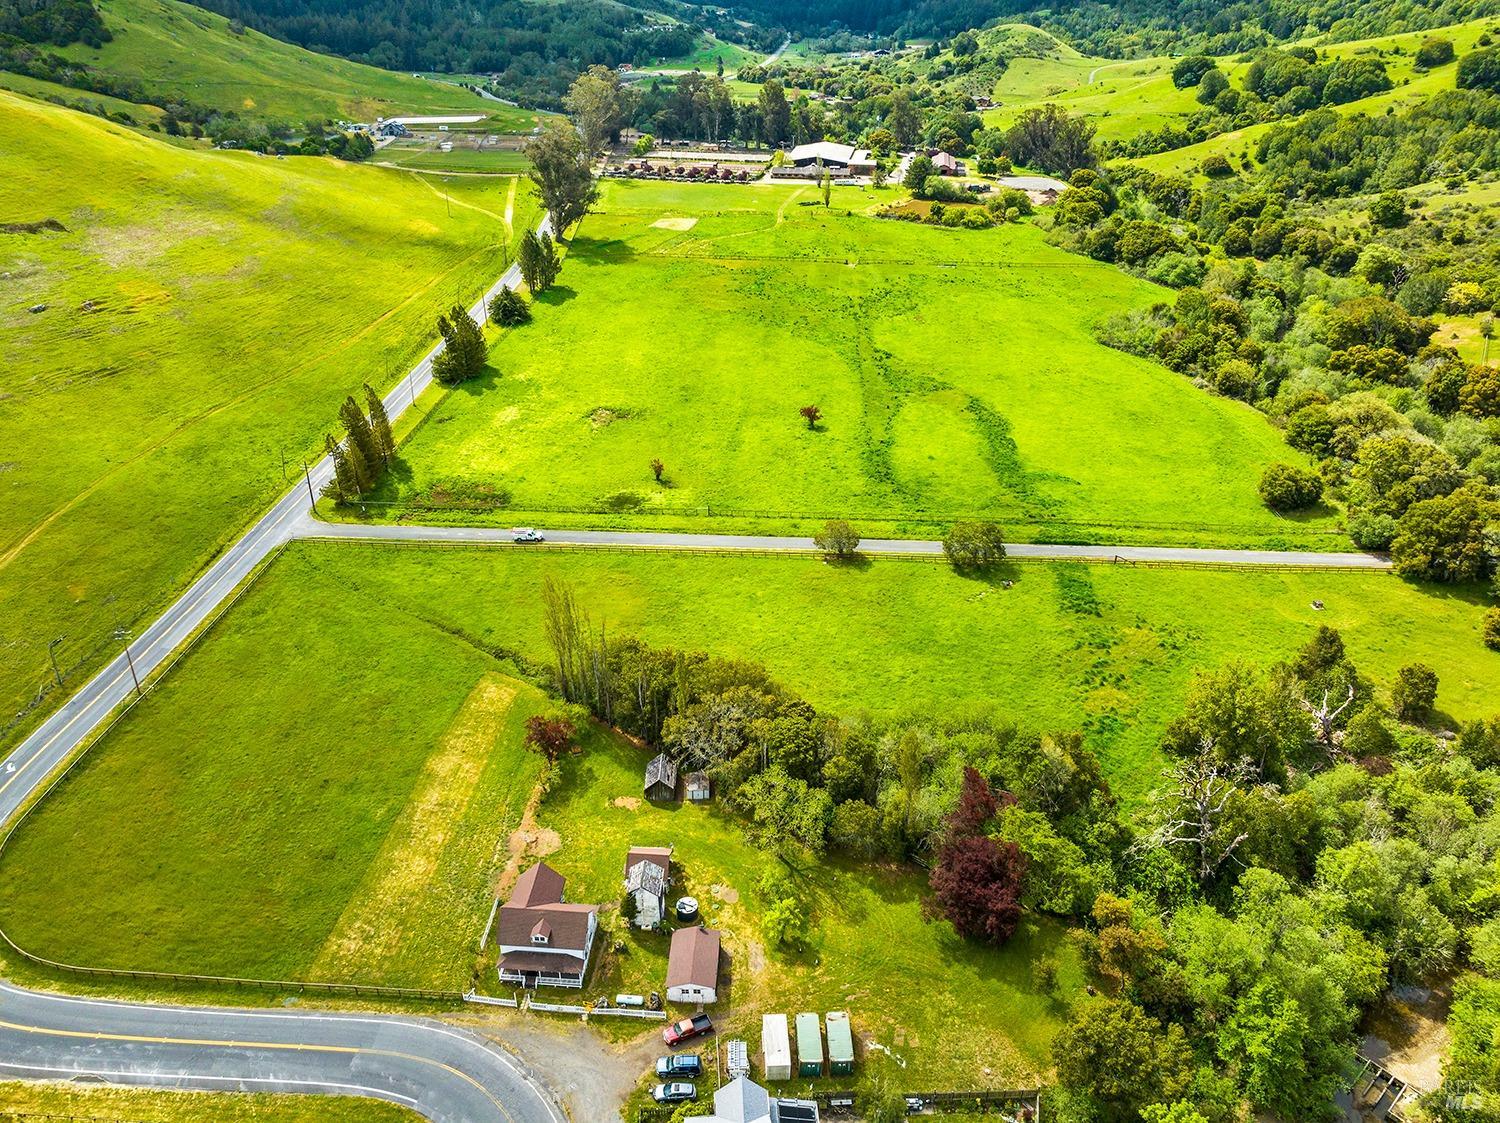 Photo of 4299 Nicasio Valley Rd in Nicasio, CA